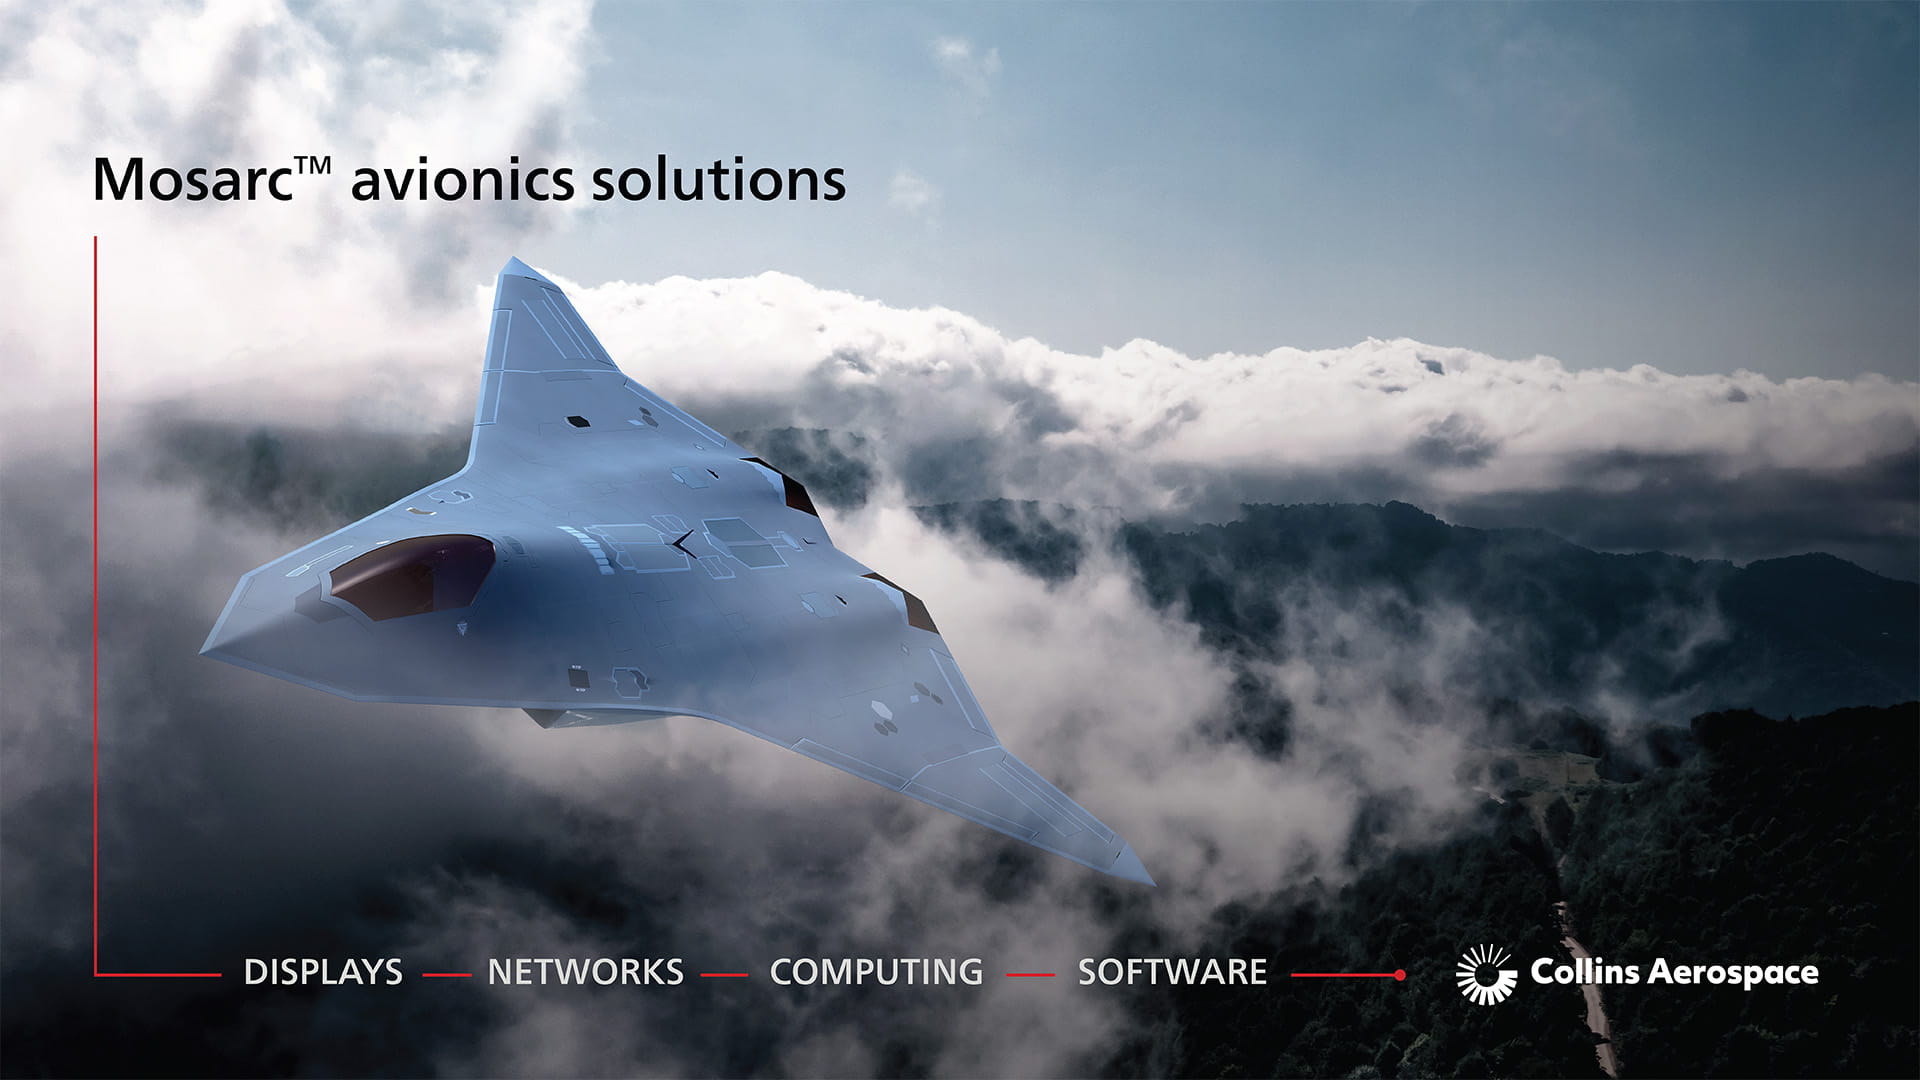 Infographic describing the components of Collins Mosarc avionics solutions: Displays, networks, computing solutions, and software.